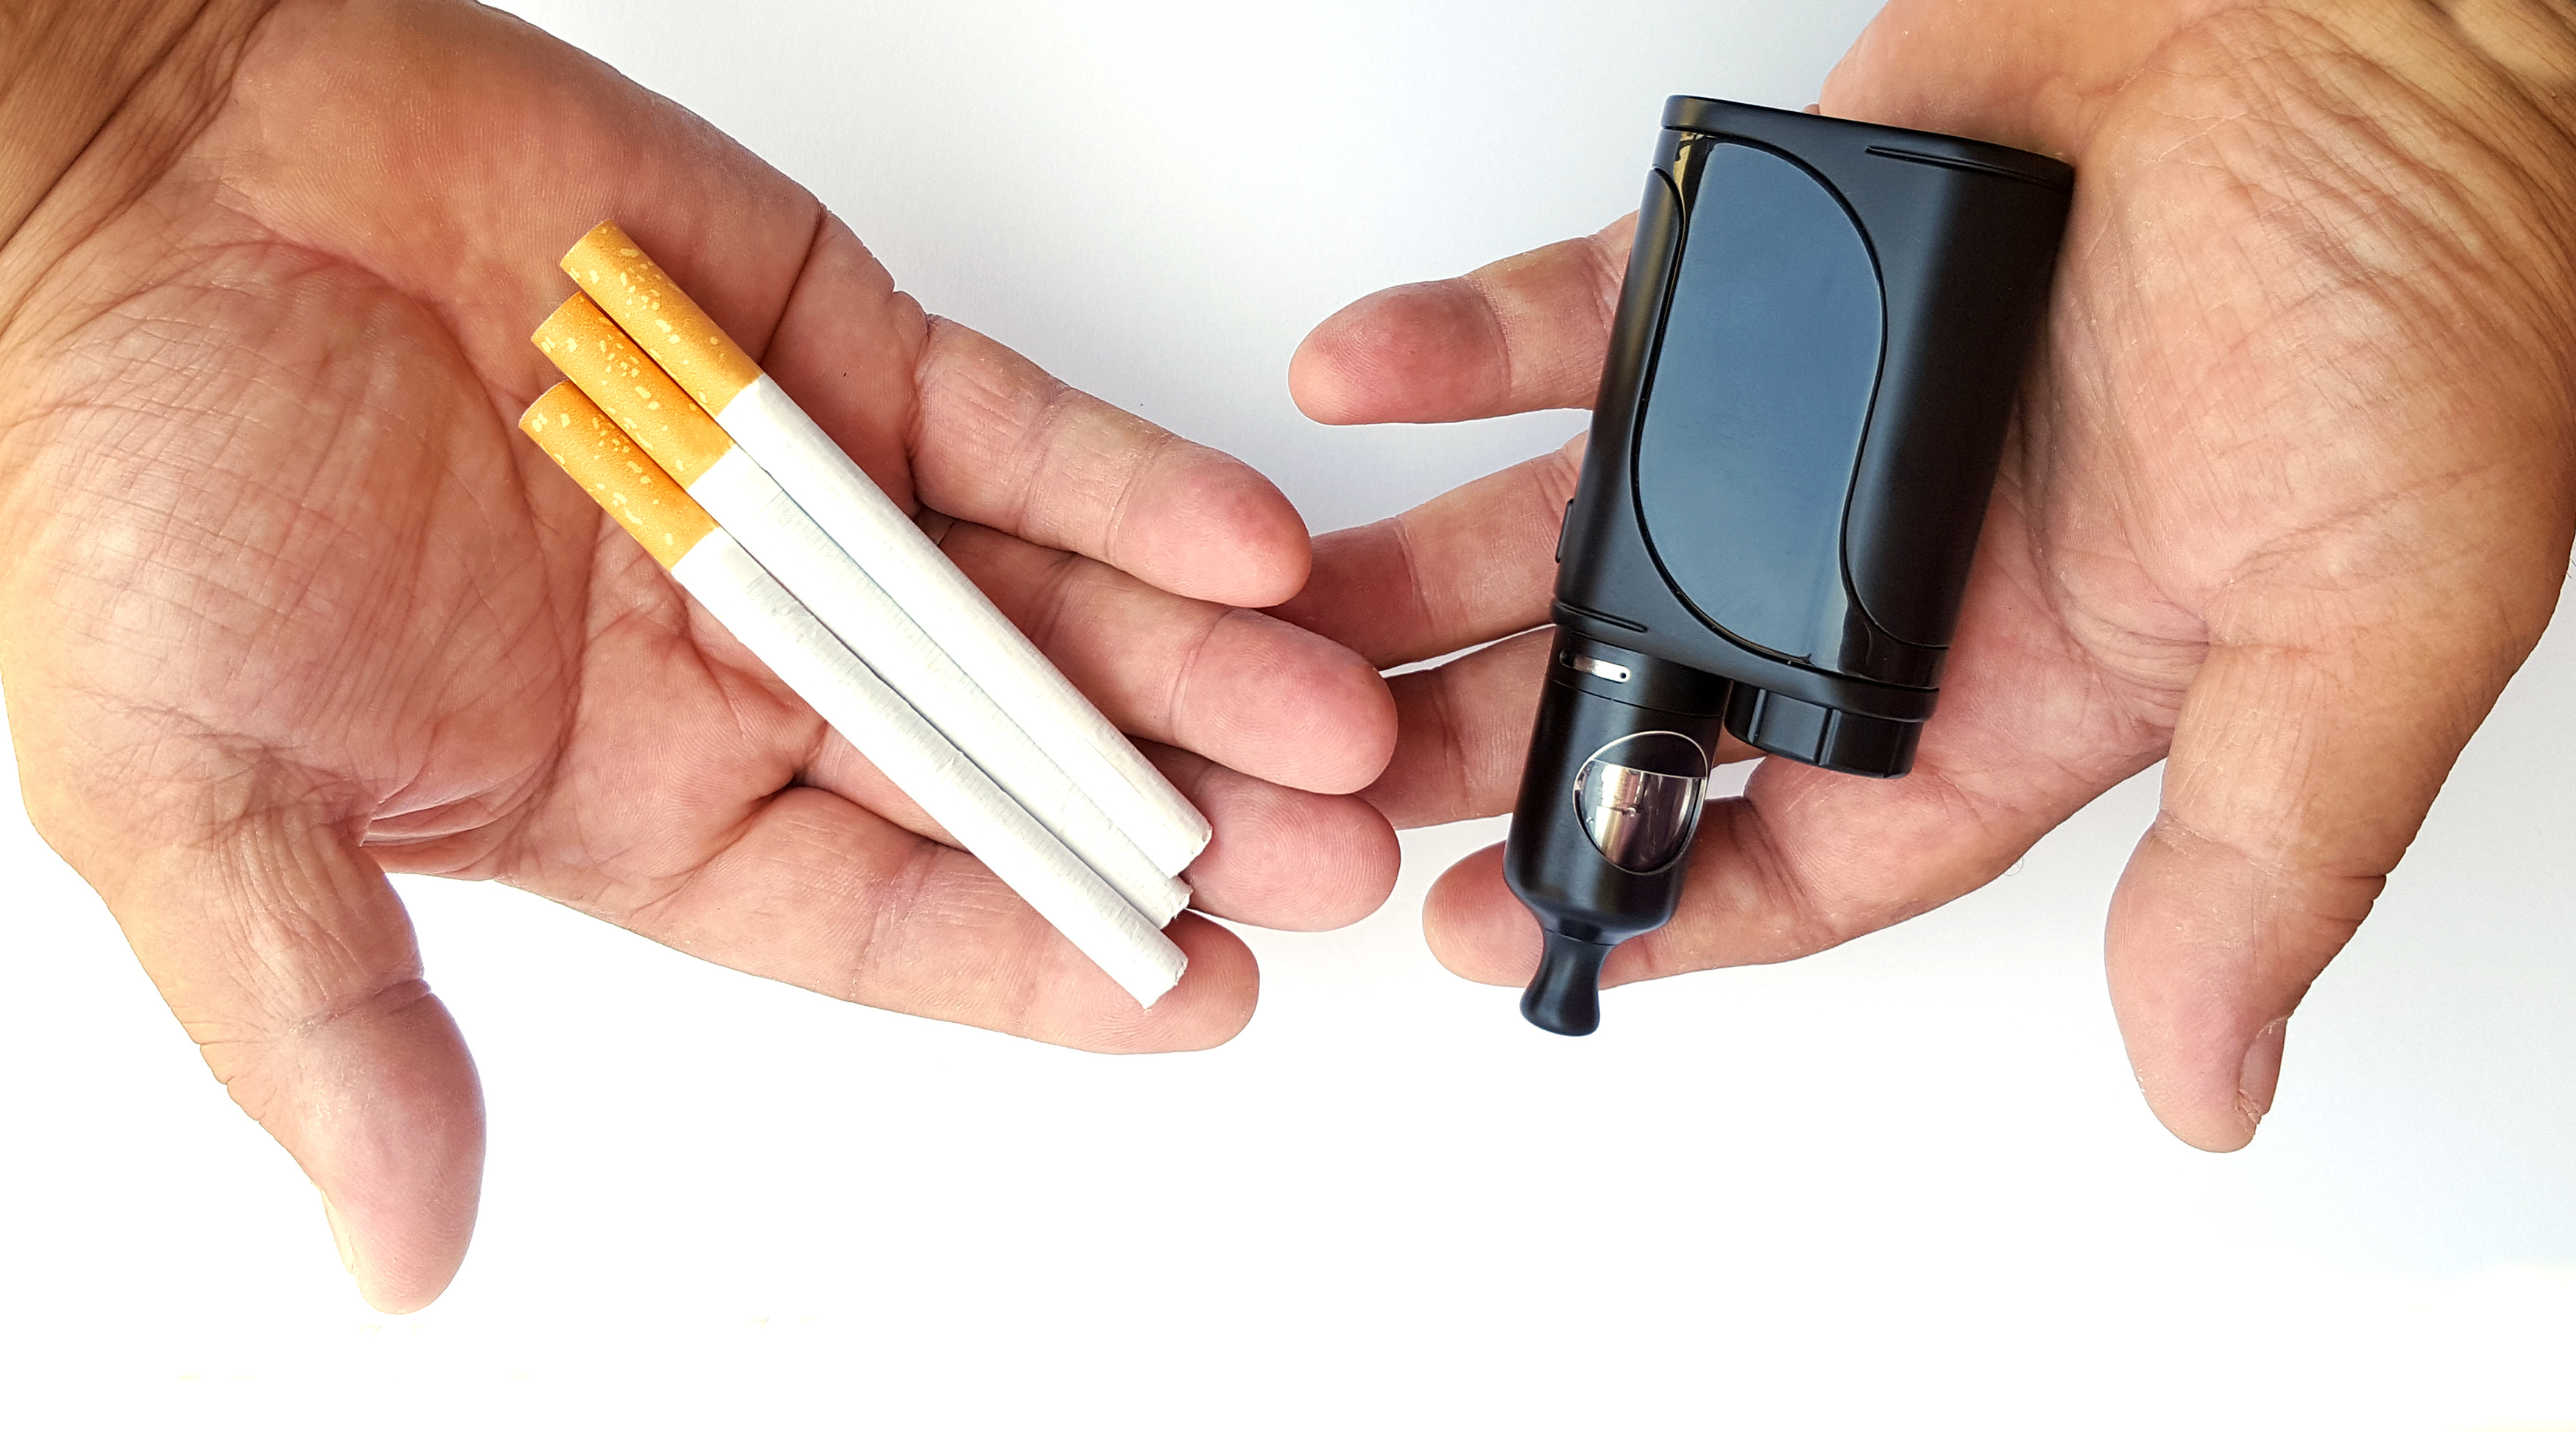 The electronic cigarette is often presented as an alternative to quit smoking (Photo: American Cancer Society)